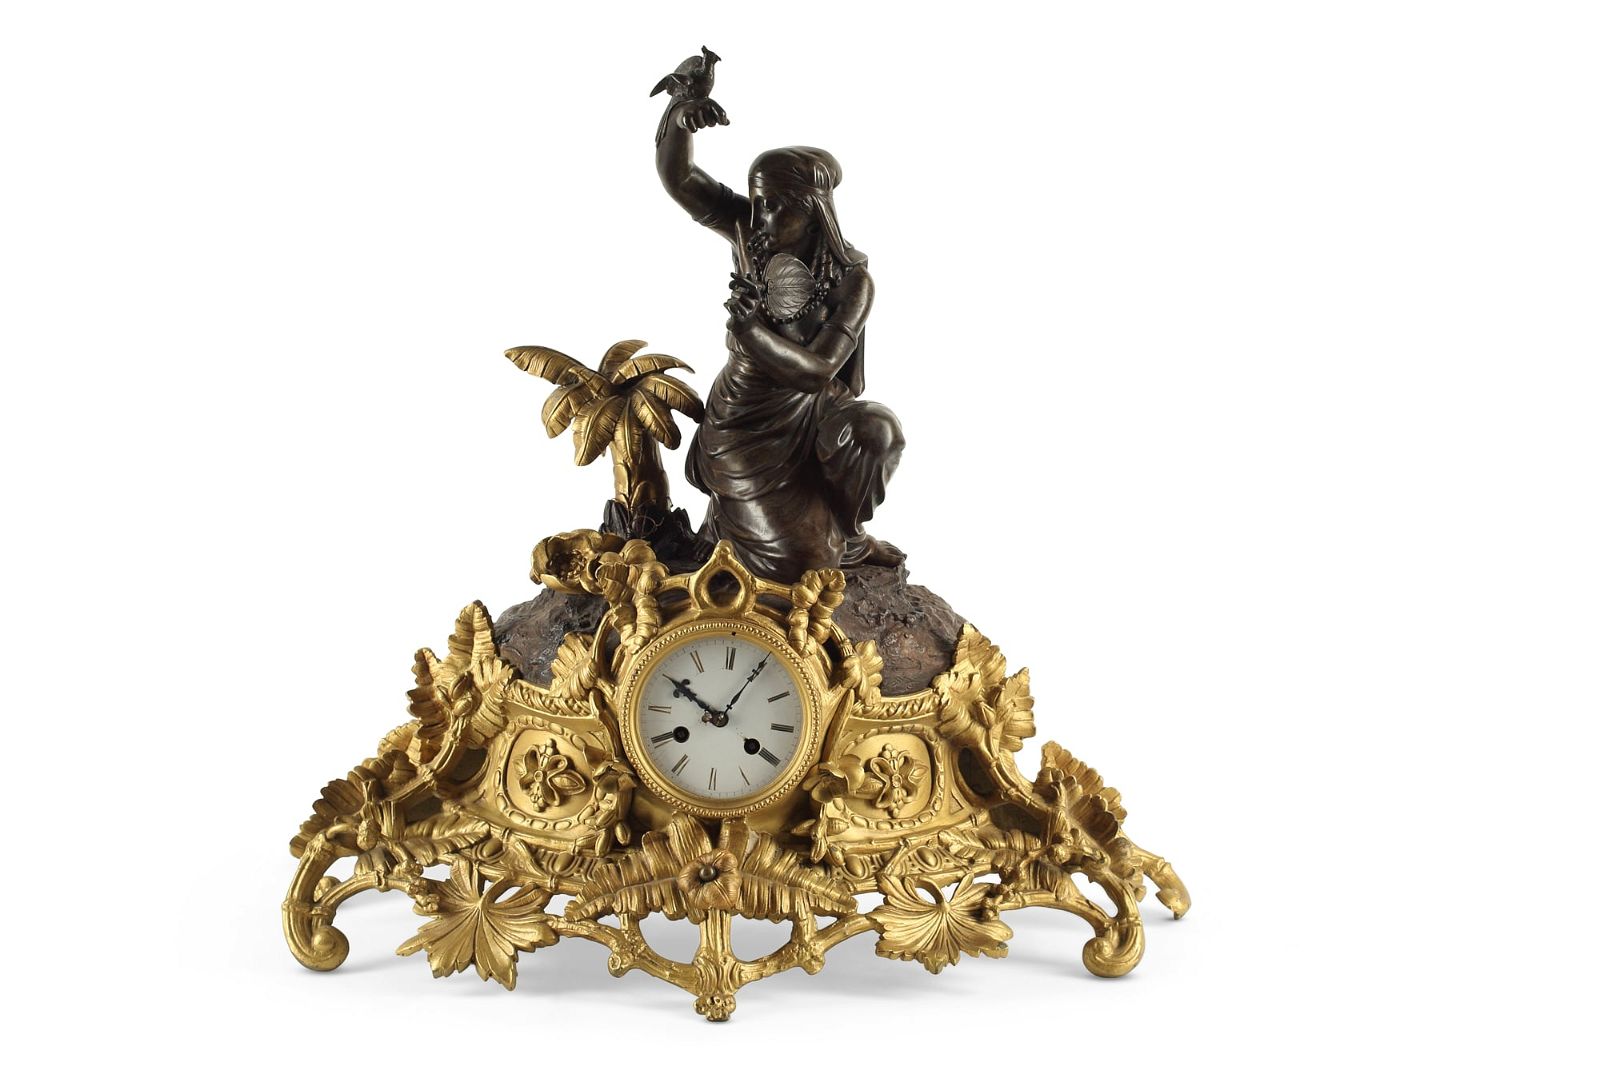 A FRENCH BRONZE FIGURAL MANTEL